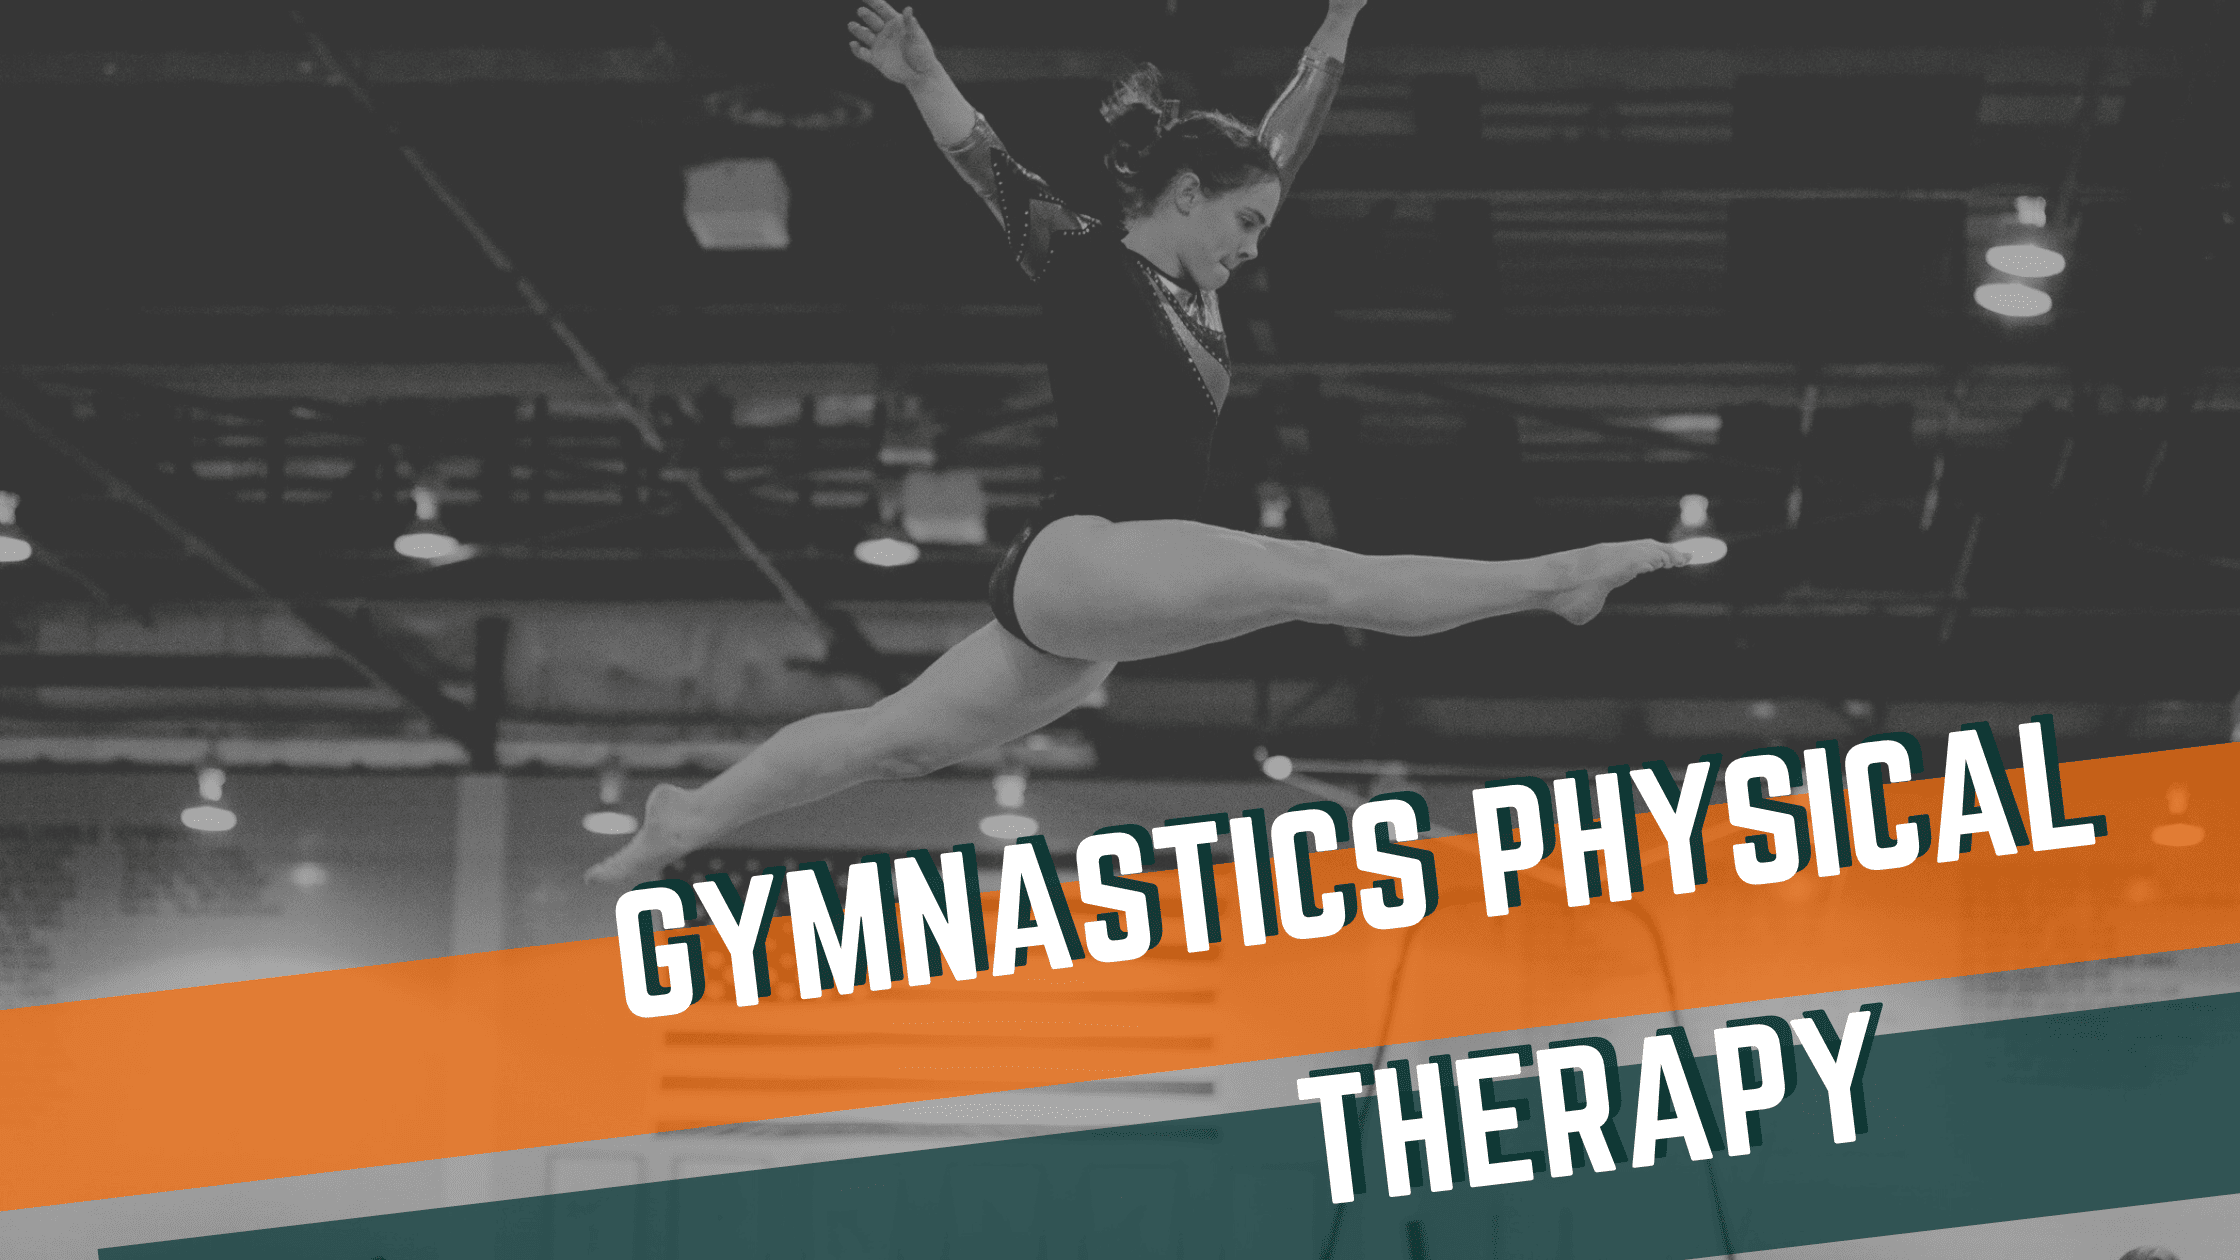 Featured image for “Gymnastics Physical Therapy”